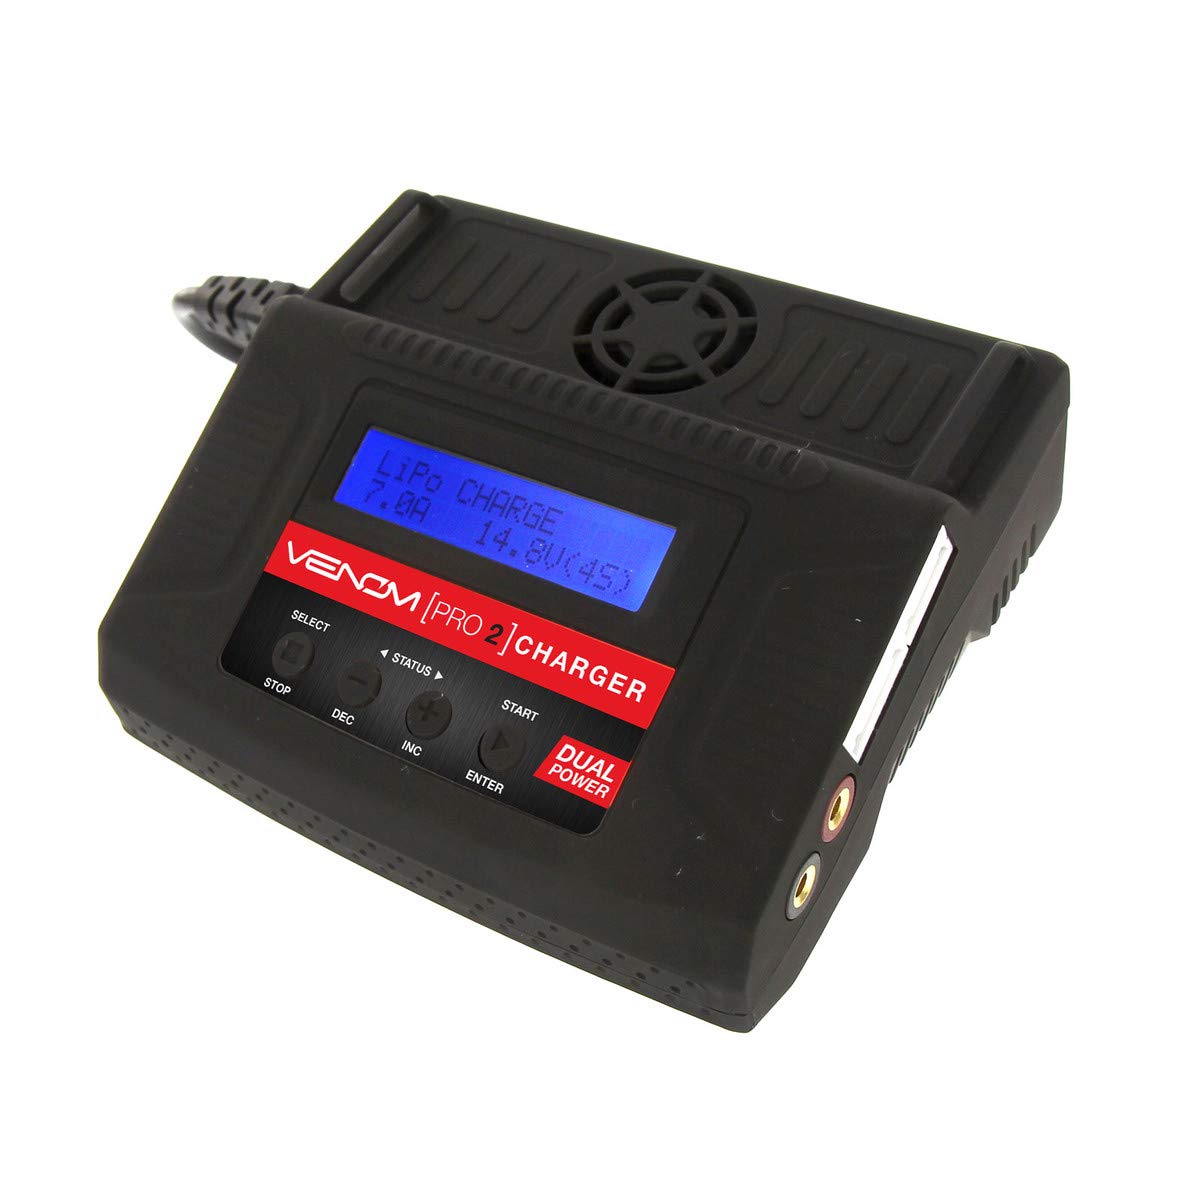  2-10 Dual Output DC Multi Charger